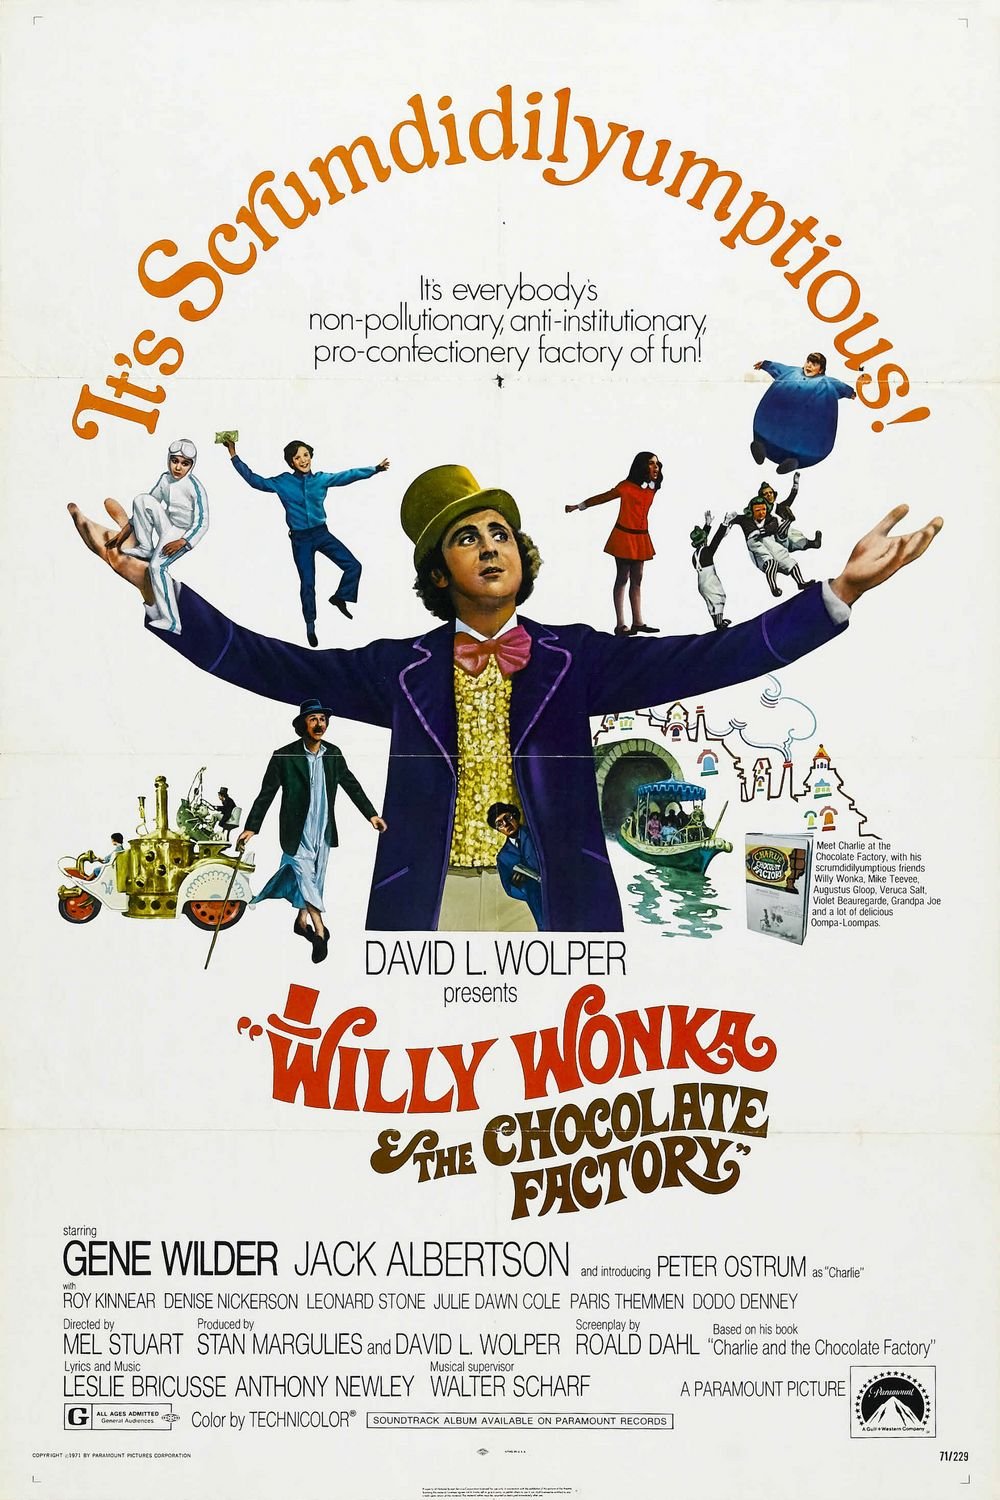 Poster of the movie Willy Wonka & the Chocolate Factory